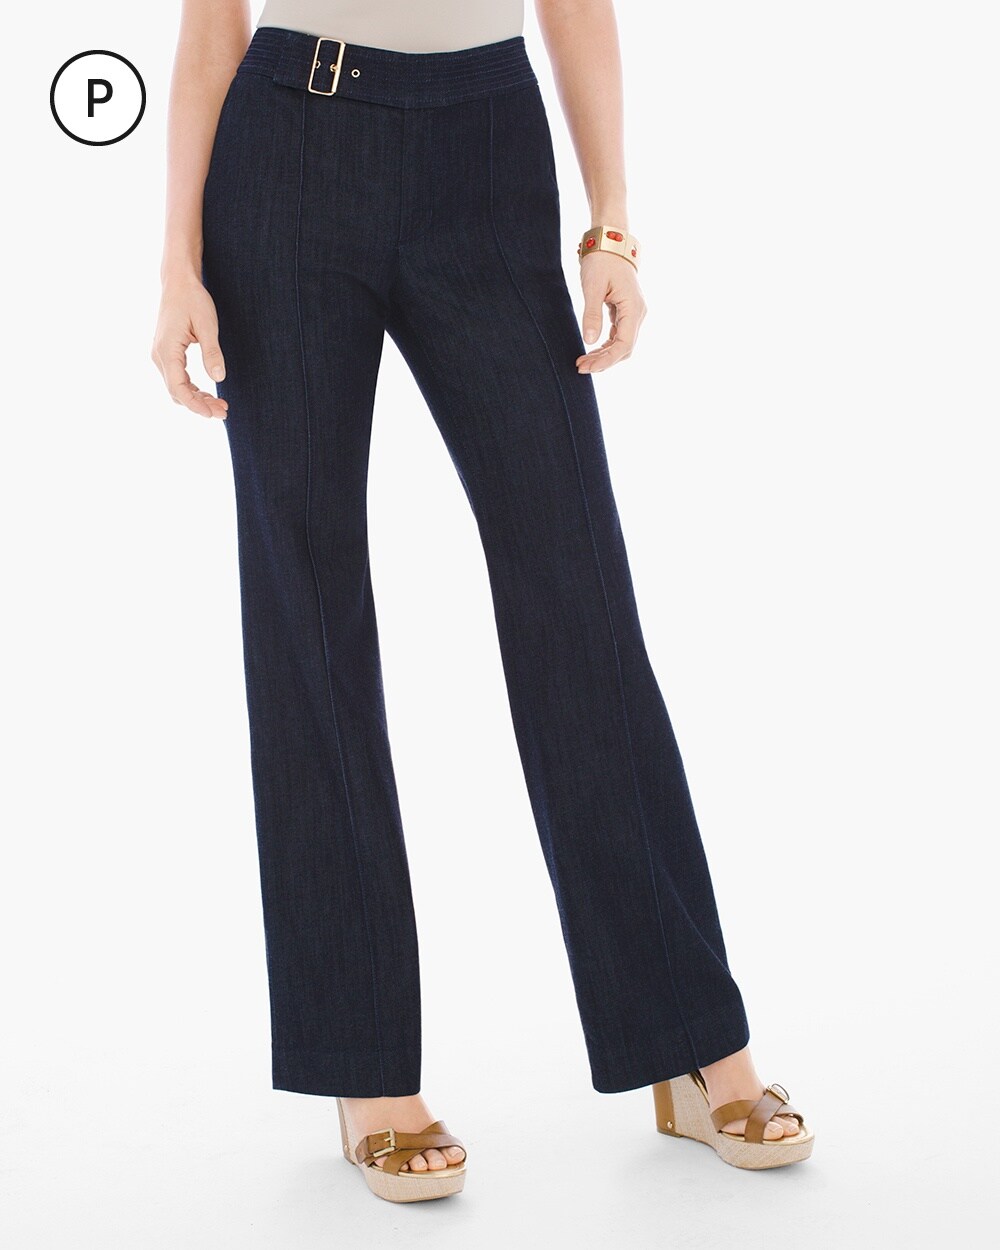 Platinum Petite Belted Trousers